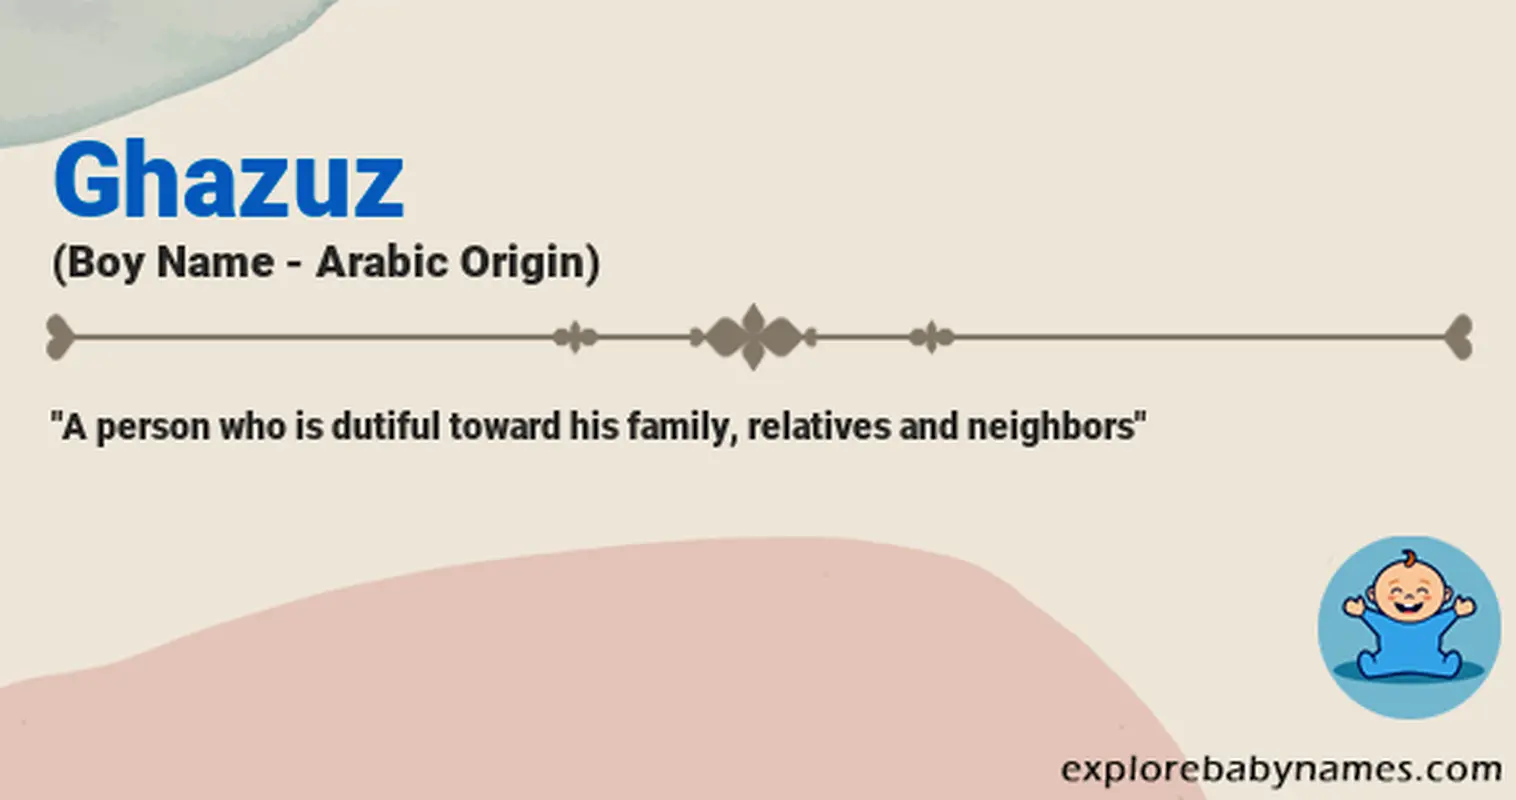 Meaning of Ghazuz